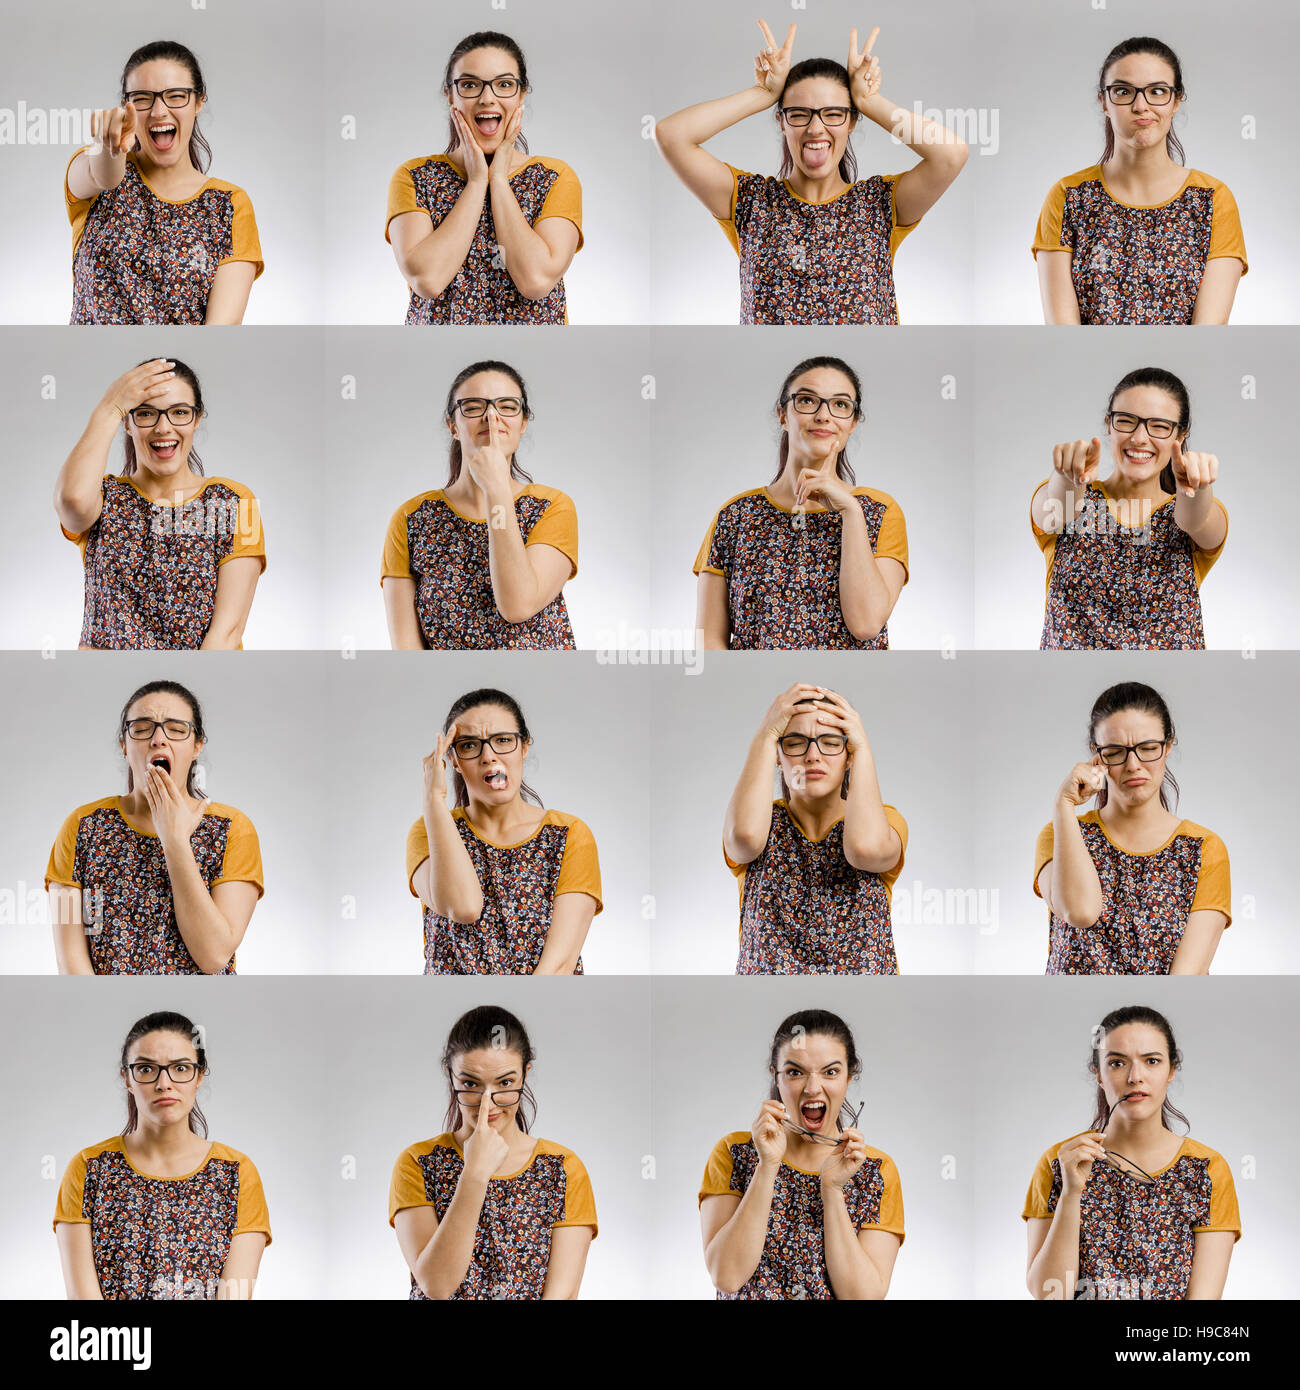 Multiple portraits of the same woman making diferent expressions Stock Photo